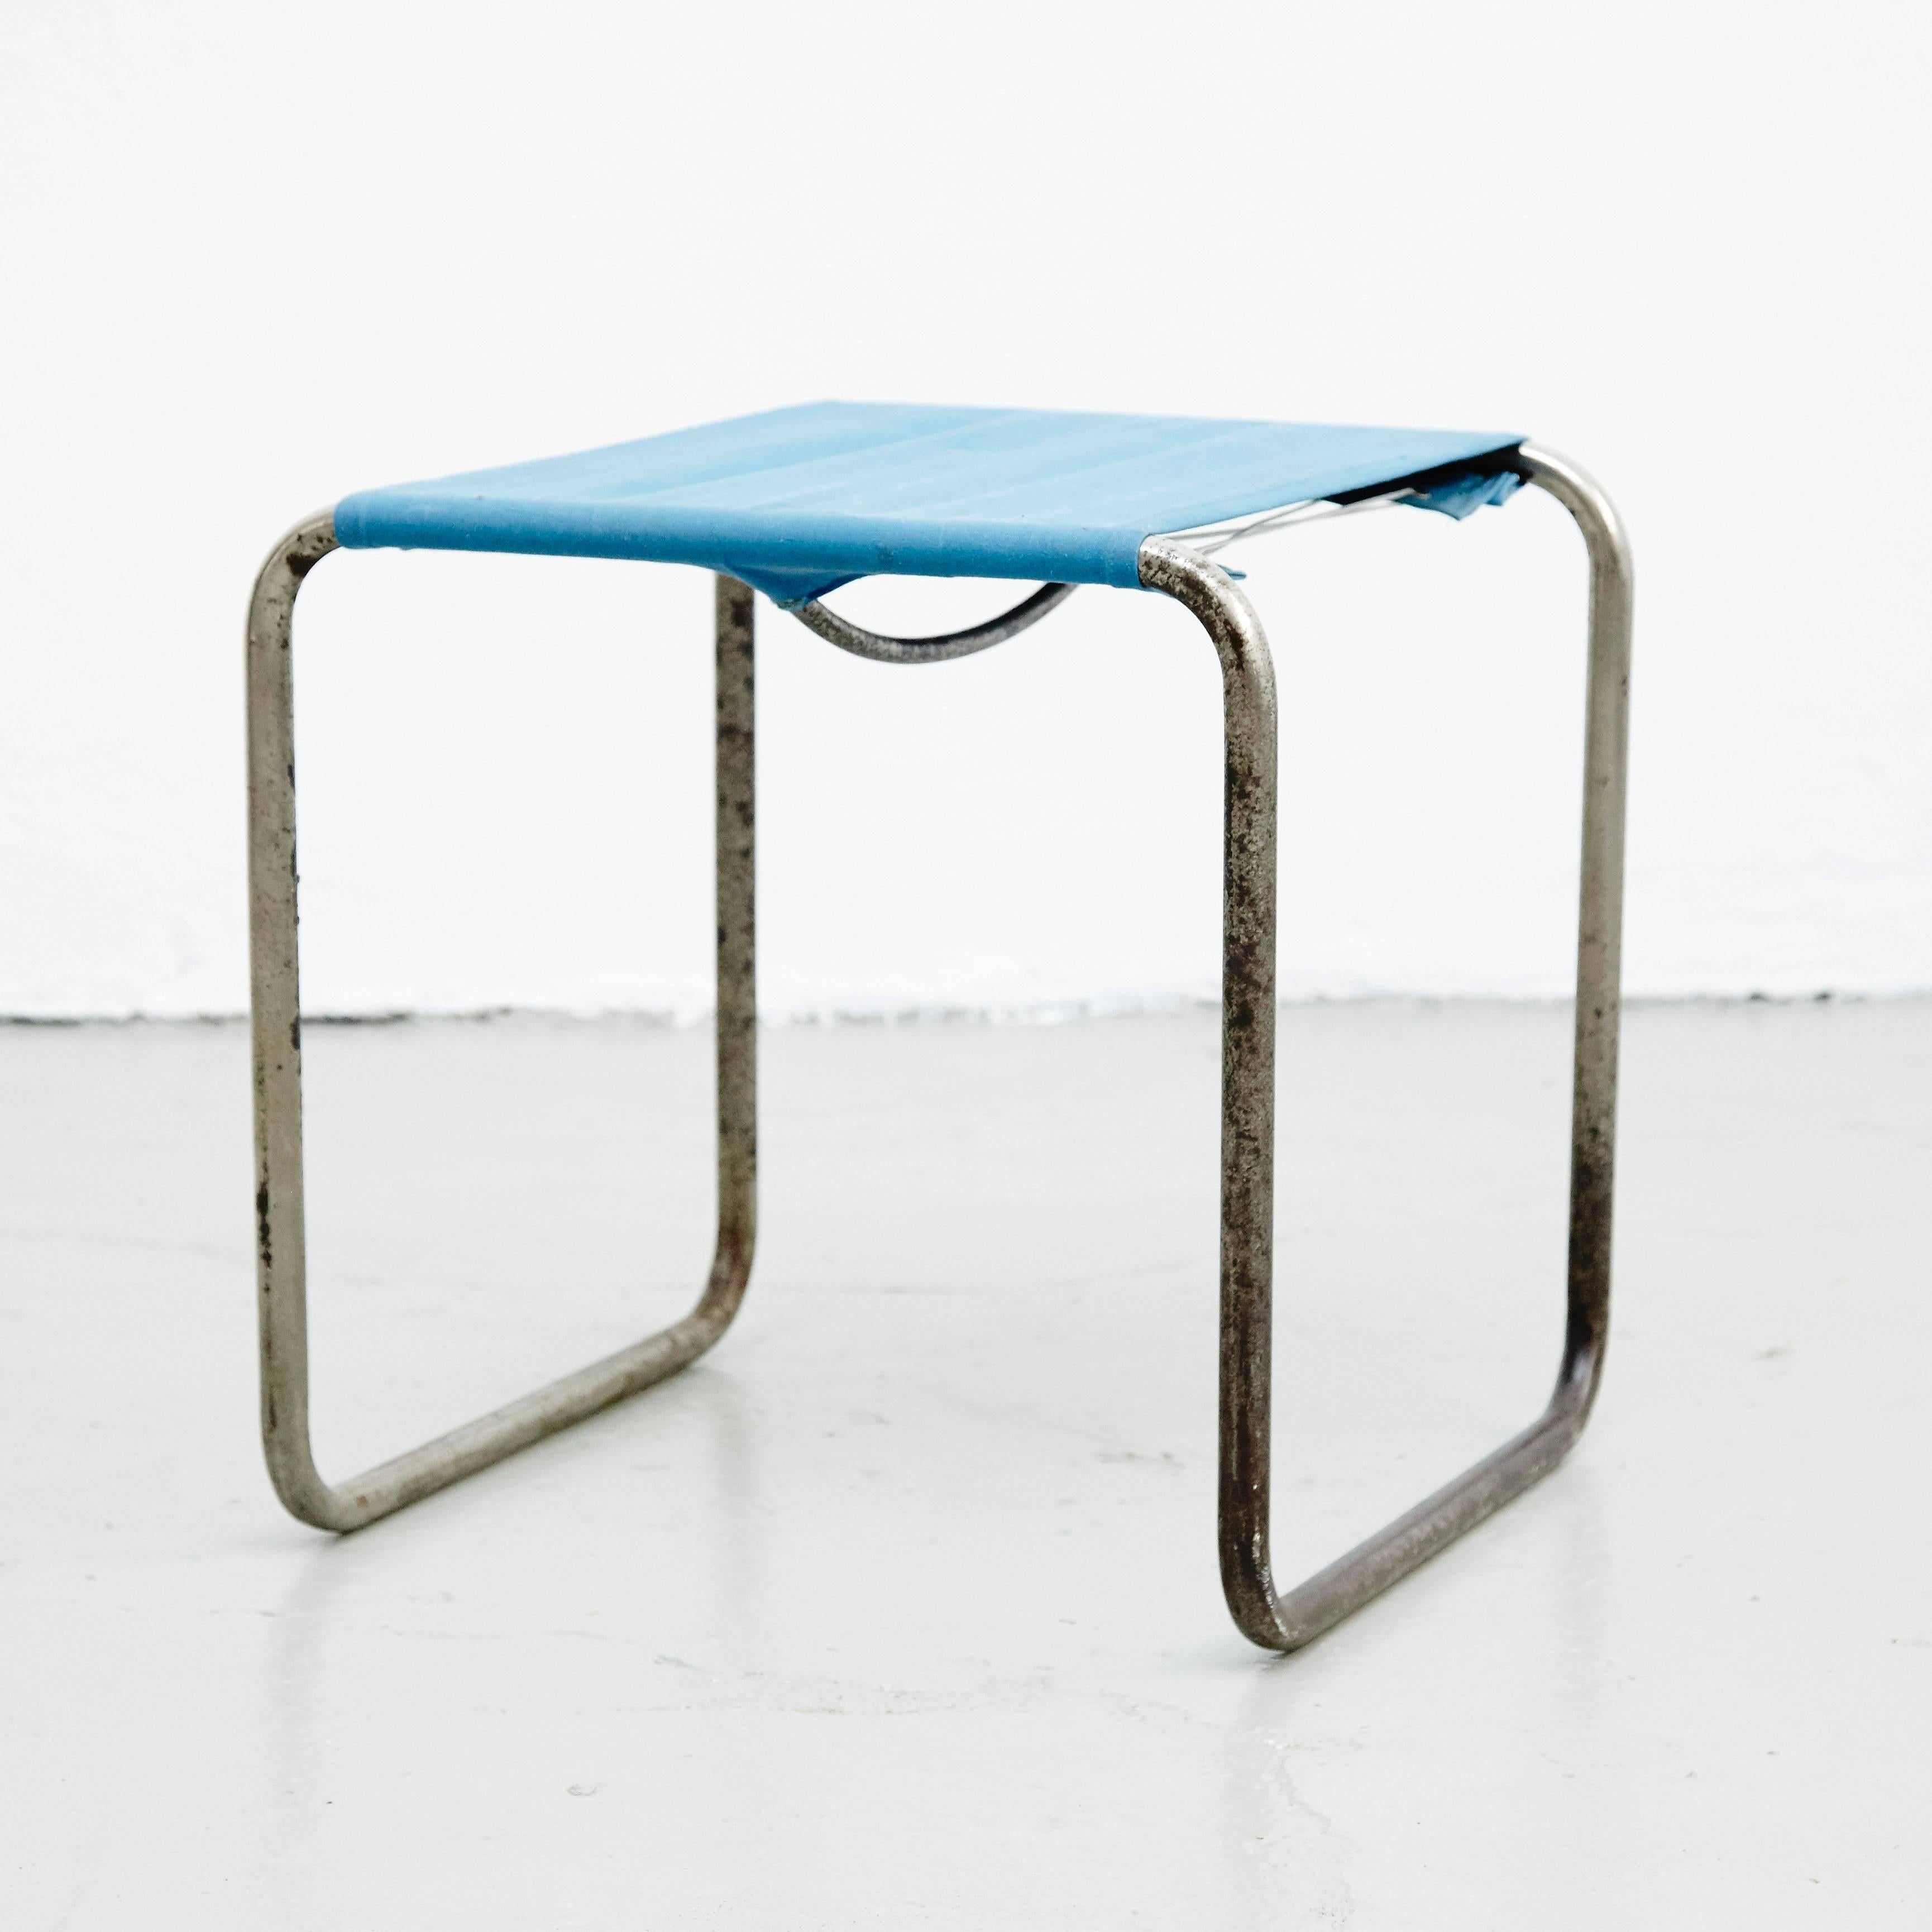 Stool designed by Marcel Breuer for Thonet around 1930

Tubular structure, fabric.

In good original condition, with minor wear consistent with age and use, preserving a nice patina 

Marcel Lajos Breuer (1902 – 1981), was a Hungarian-born